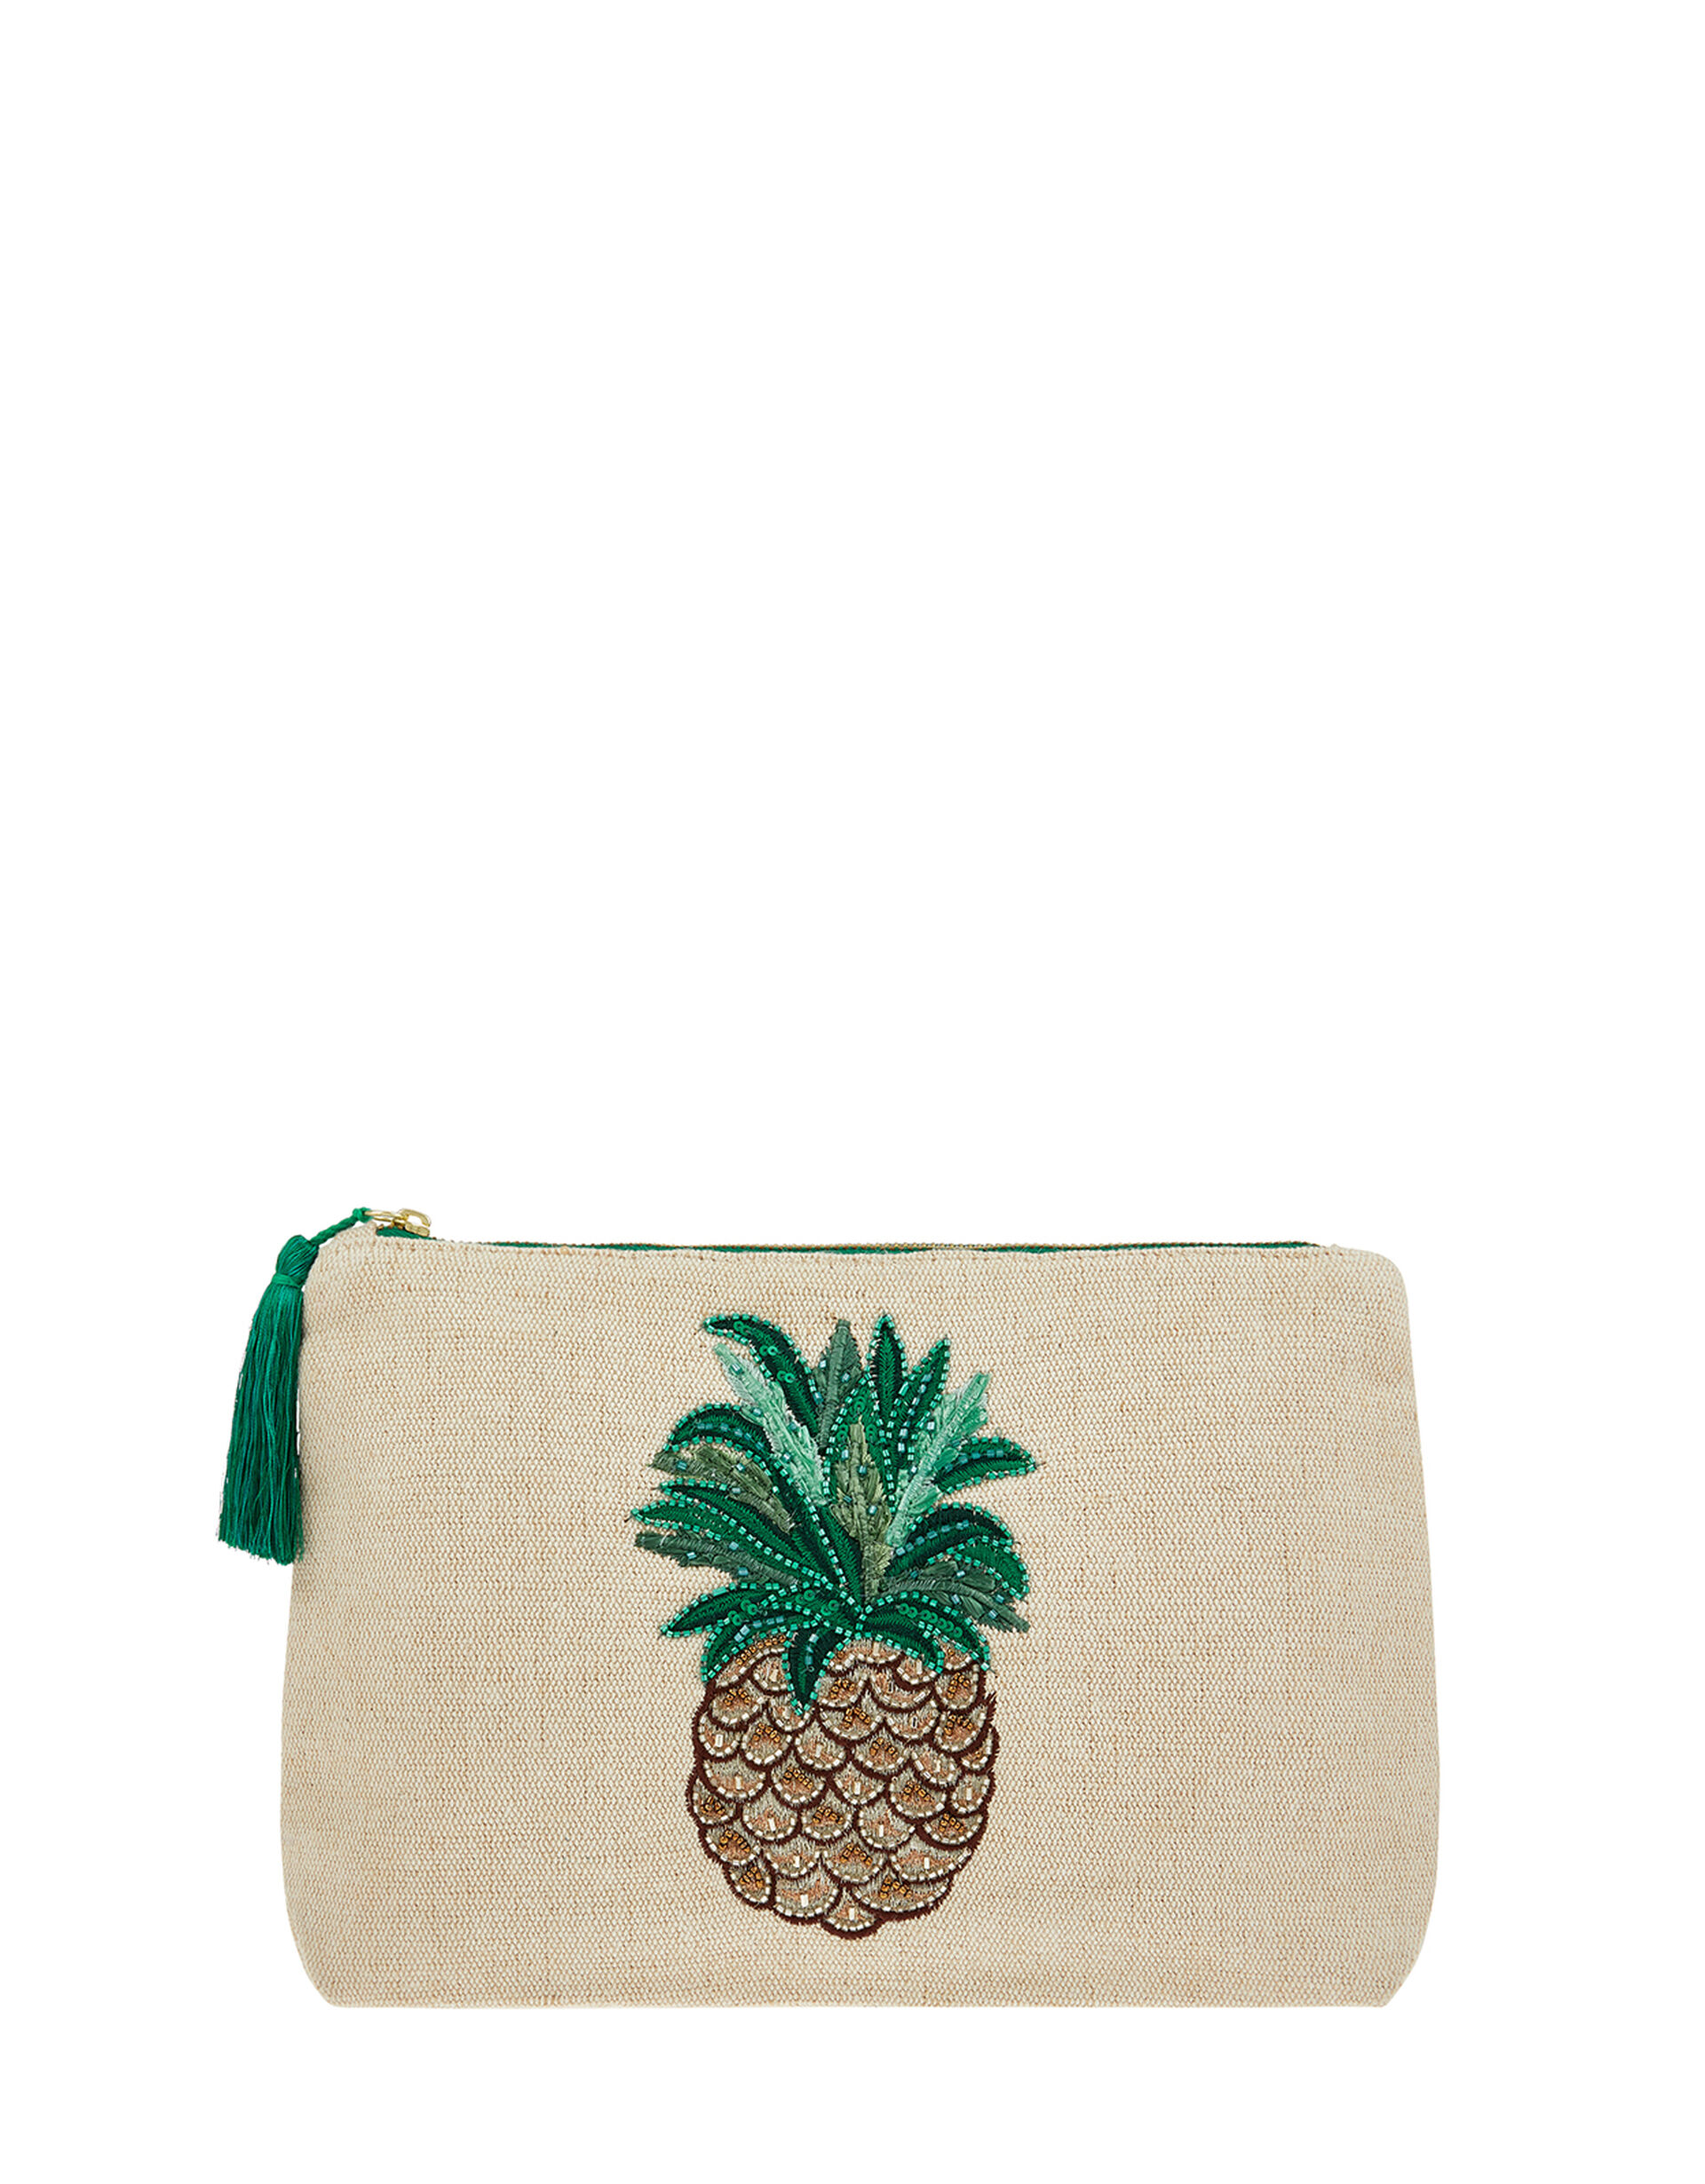 Embellished Pineapple Pouch Bag, , large